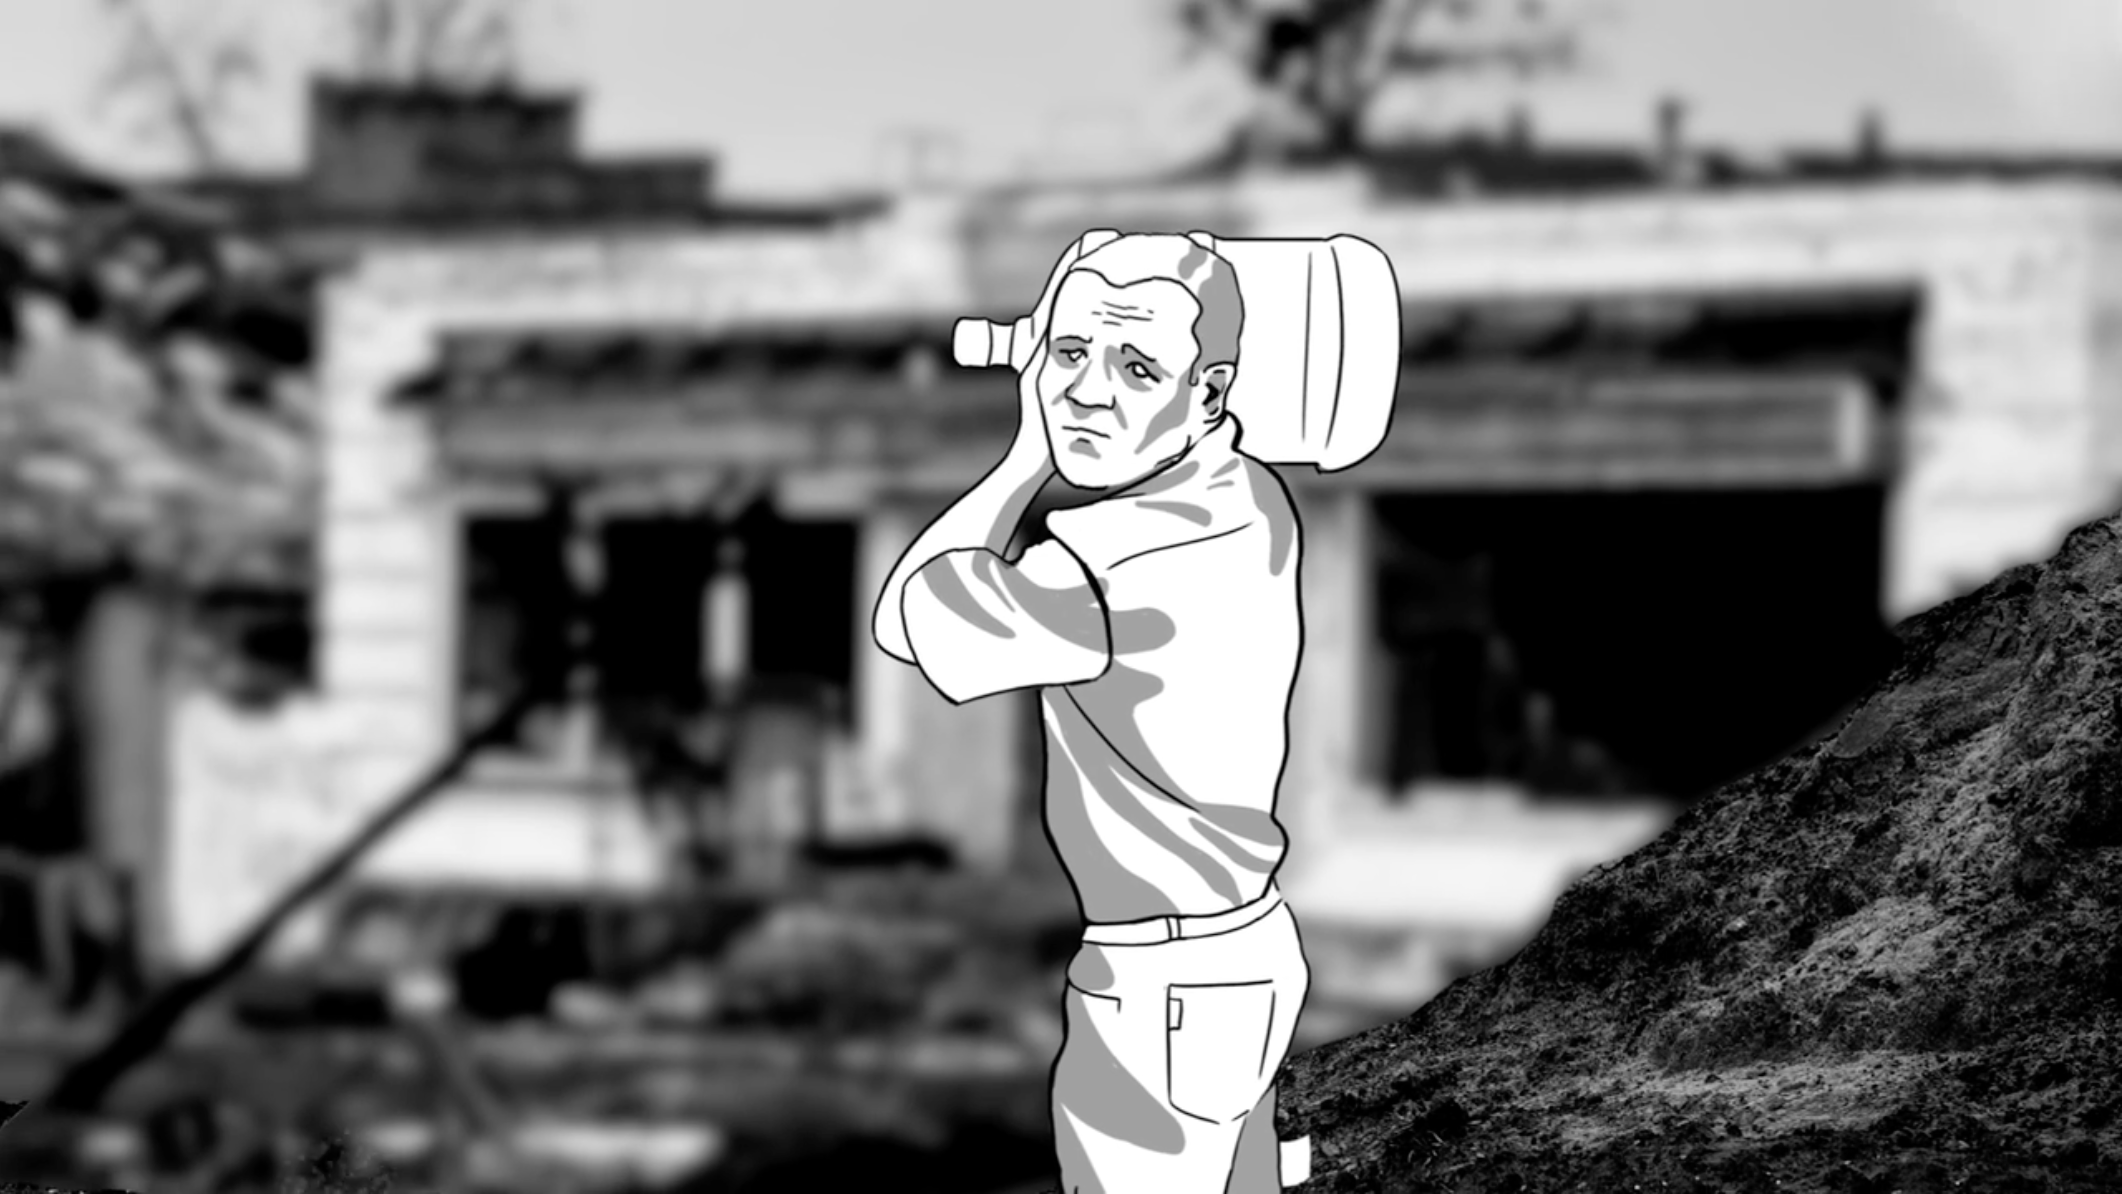 This video screenshot depicts a man carrying a water jug as he walks in front of a destroyed building. The image is made up of an illustration